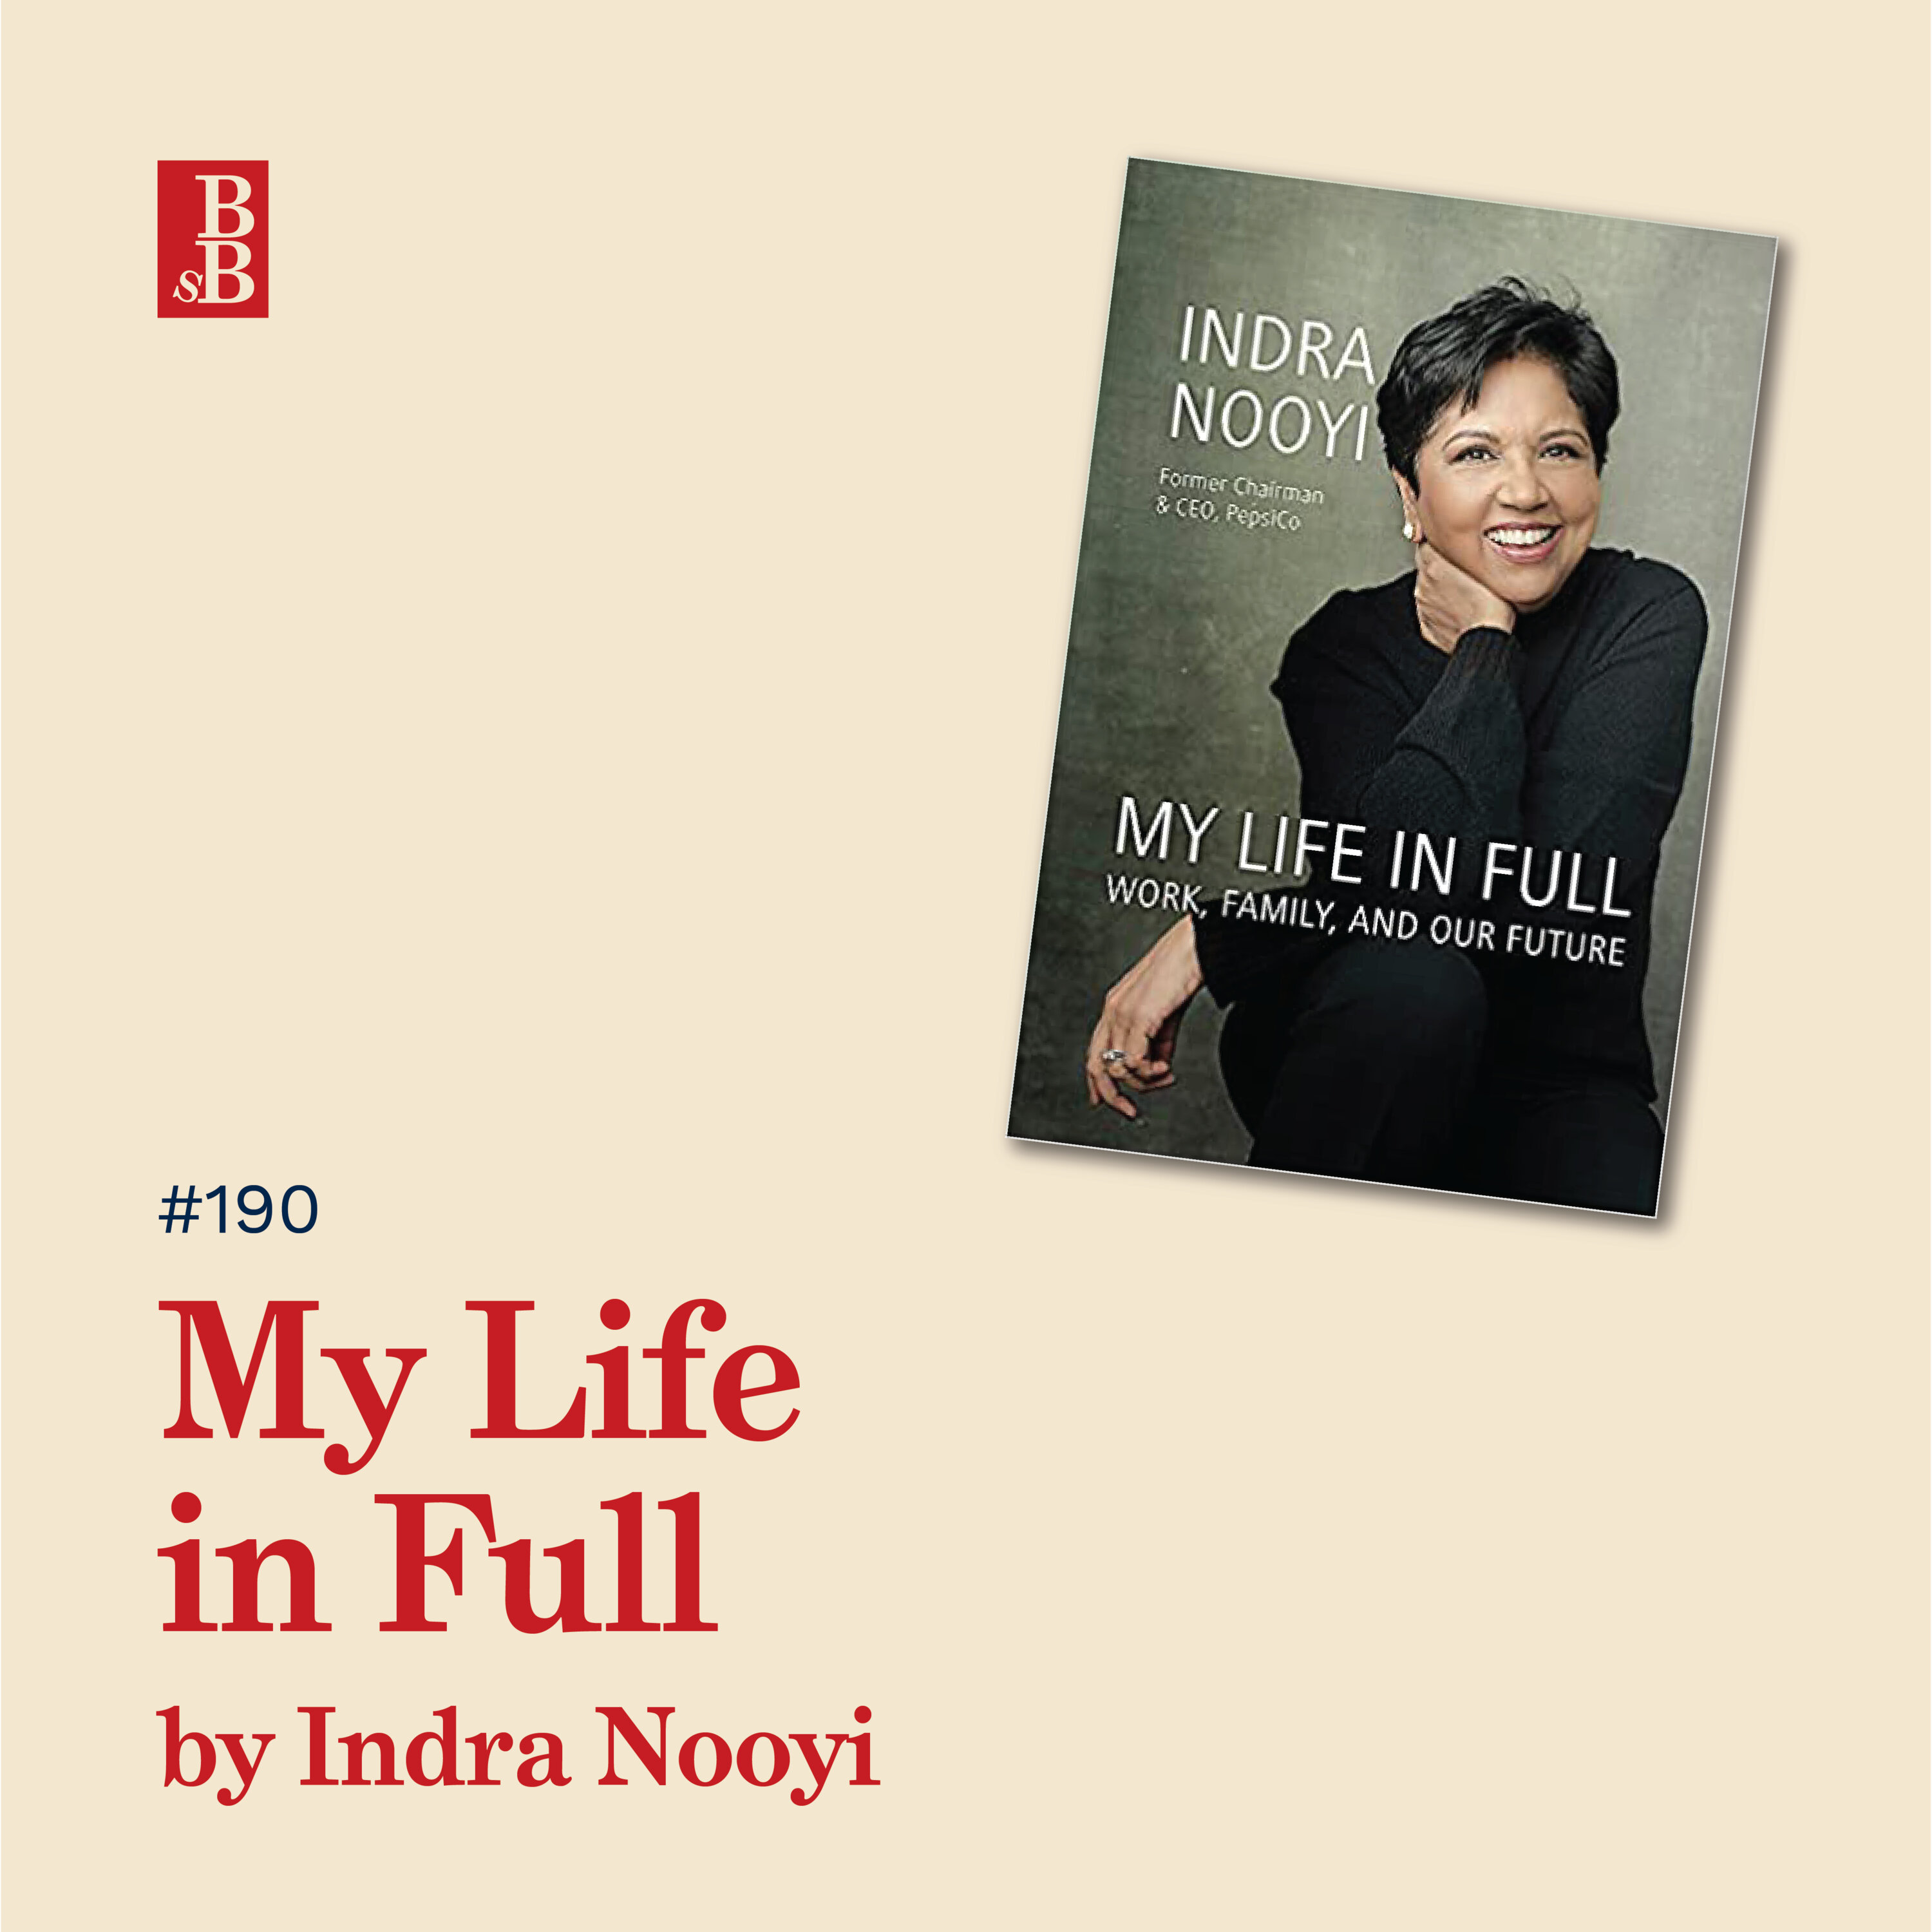 My Life in Full by Indra Nooyi: why you should put purpose and learning at the centre